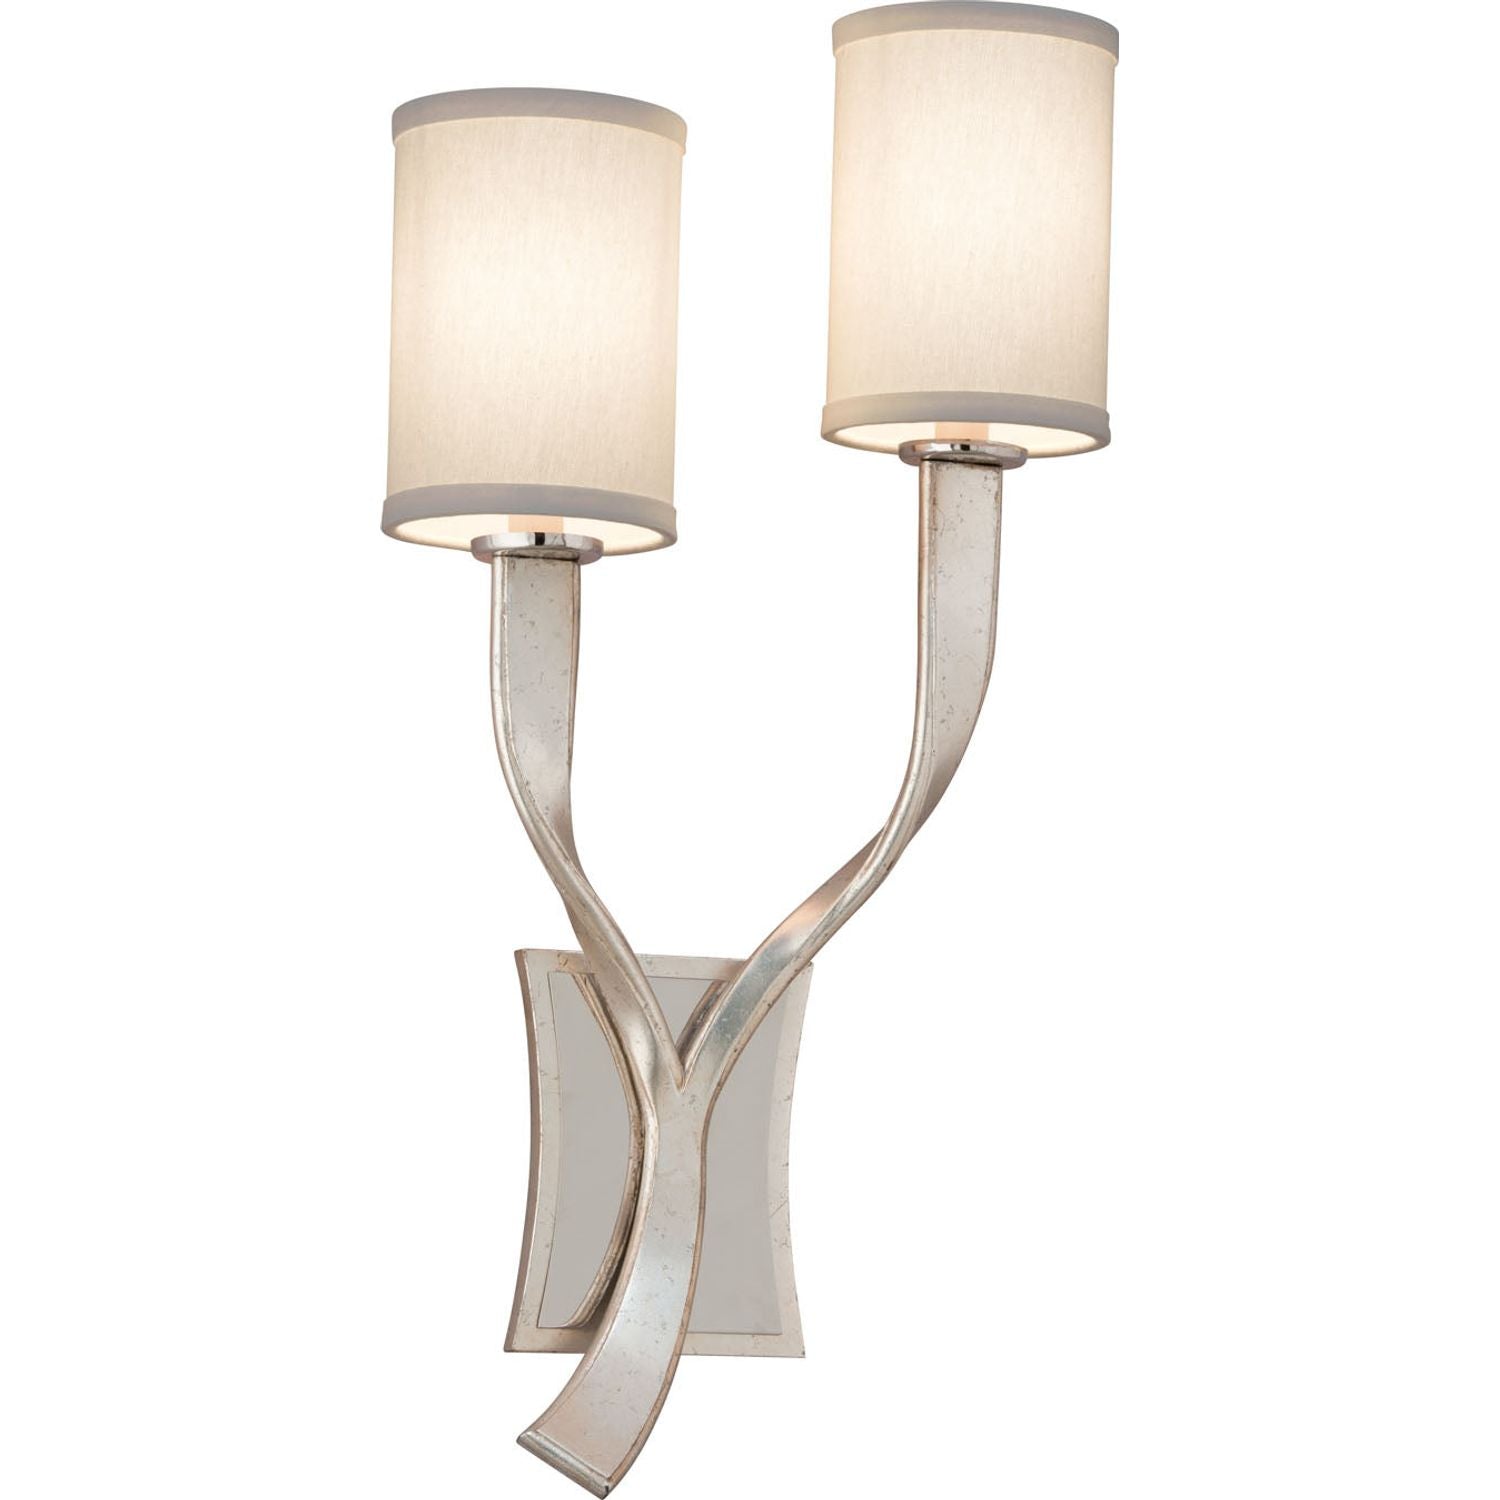 Corbett Lighting - 158-11 - Two Light Wall Sconce - Roxy - Modern Silver With Polished Stainless